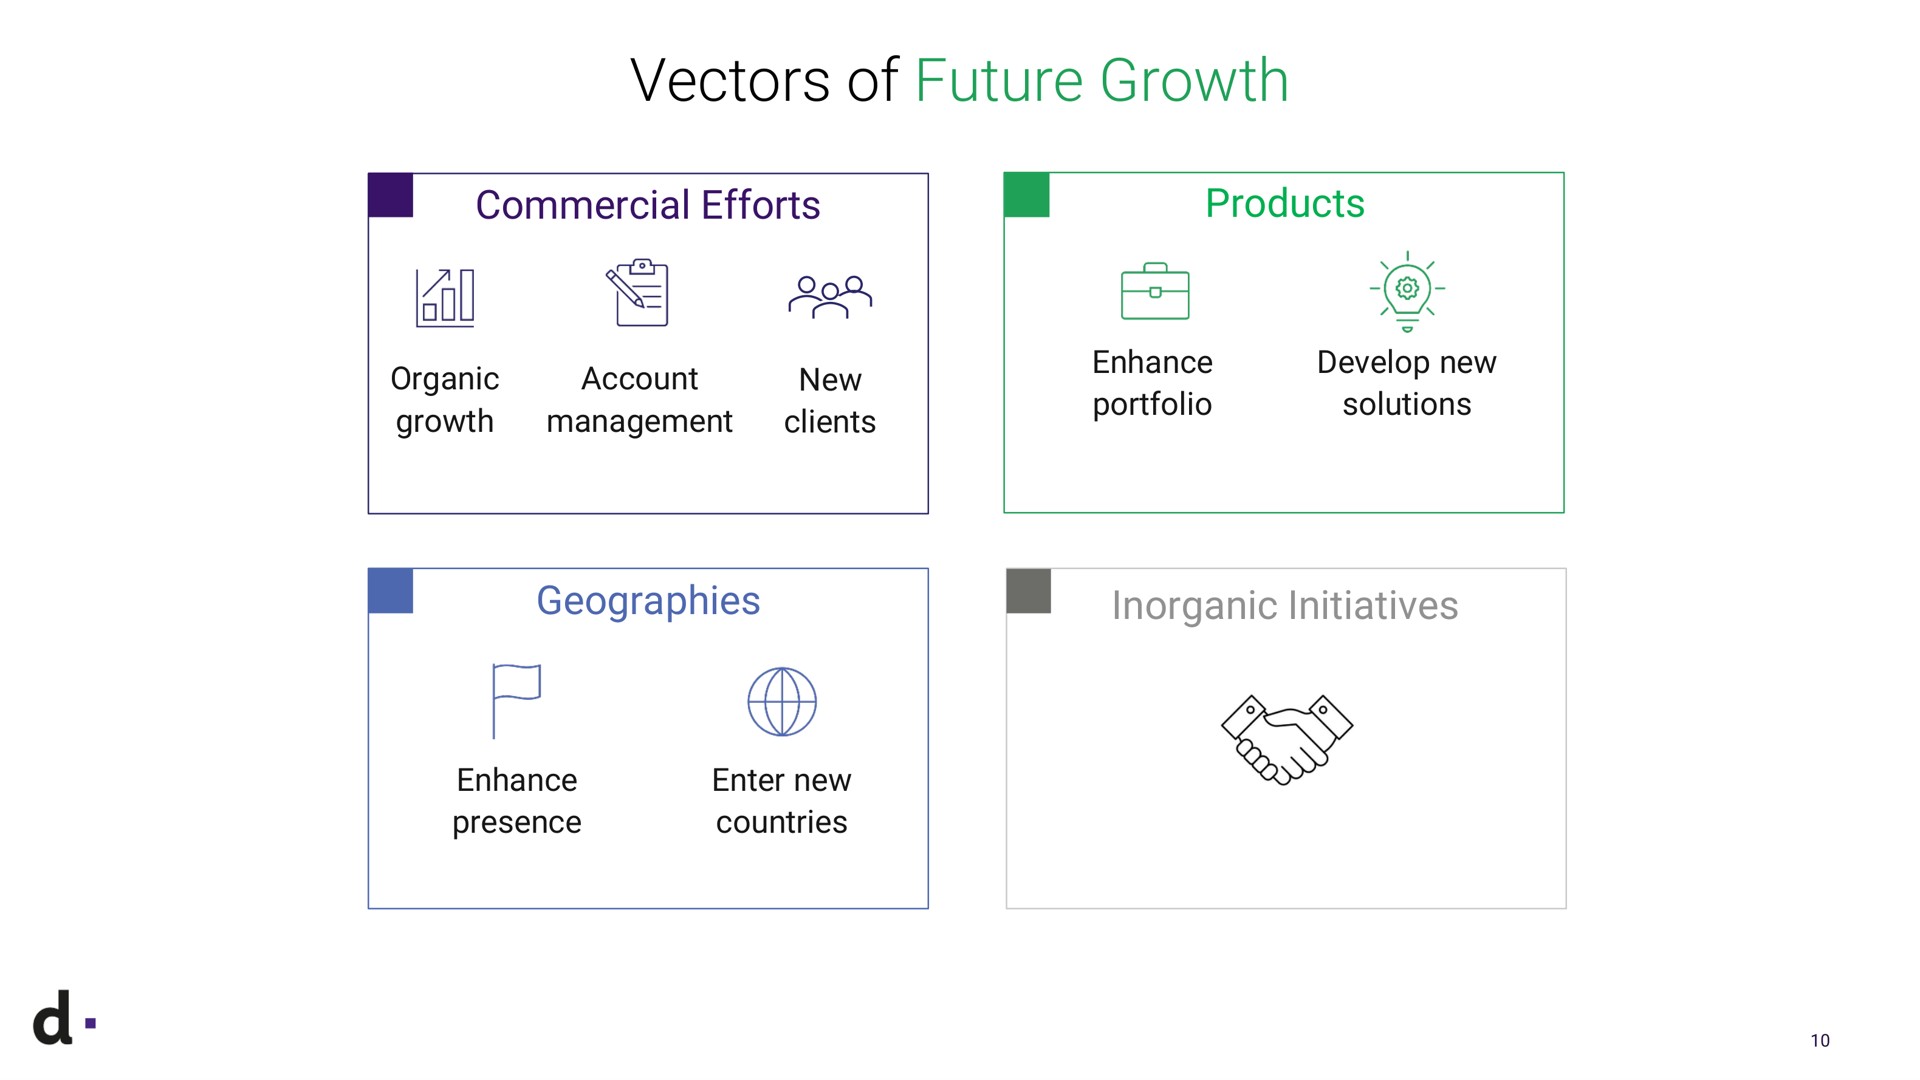 vectors of future growth commercial efforts cur account sas organic new management clients geographies enhance presence enter new countries products a enhance portfolio develop solutions i inorganic initiatives | dLocal